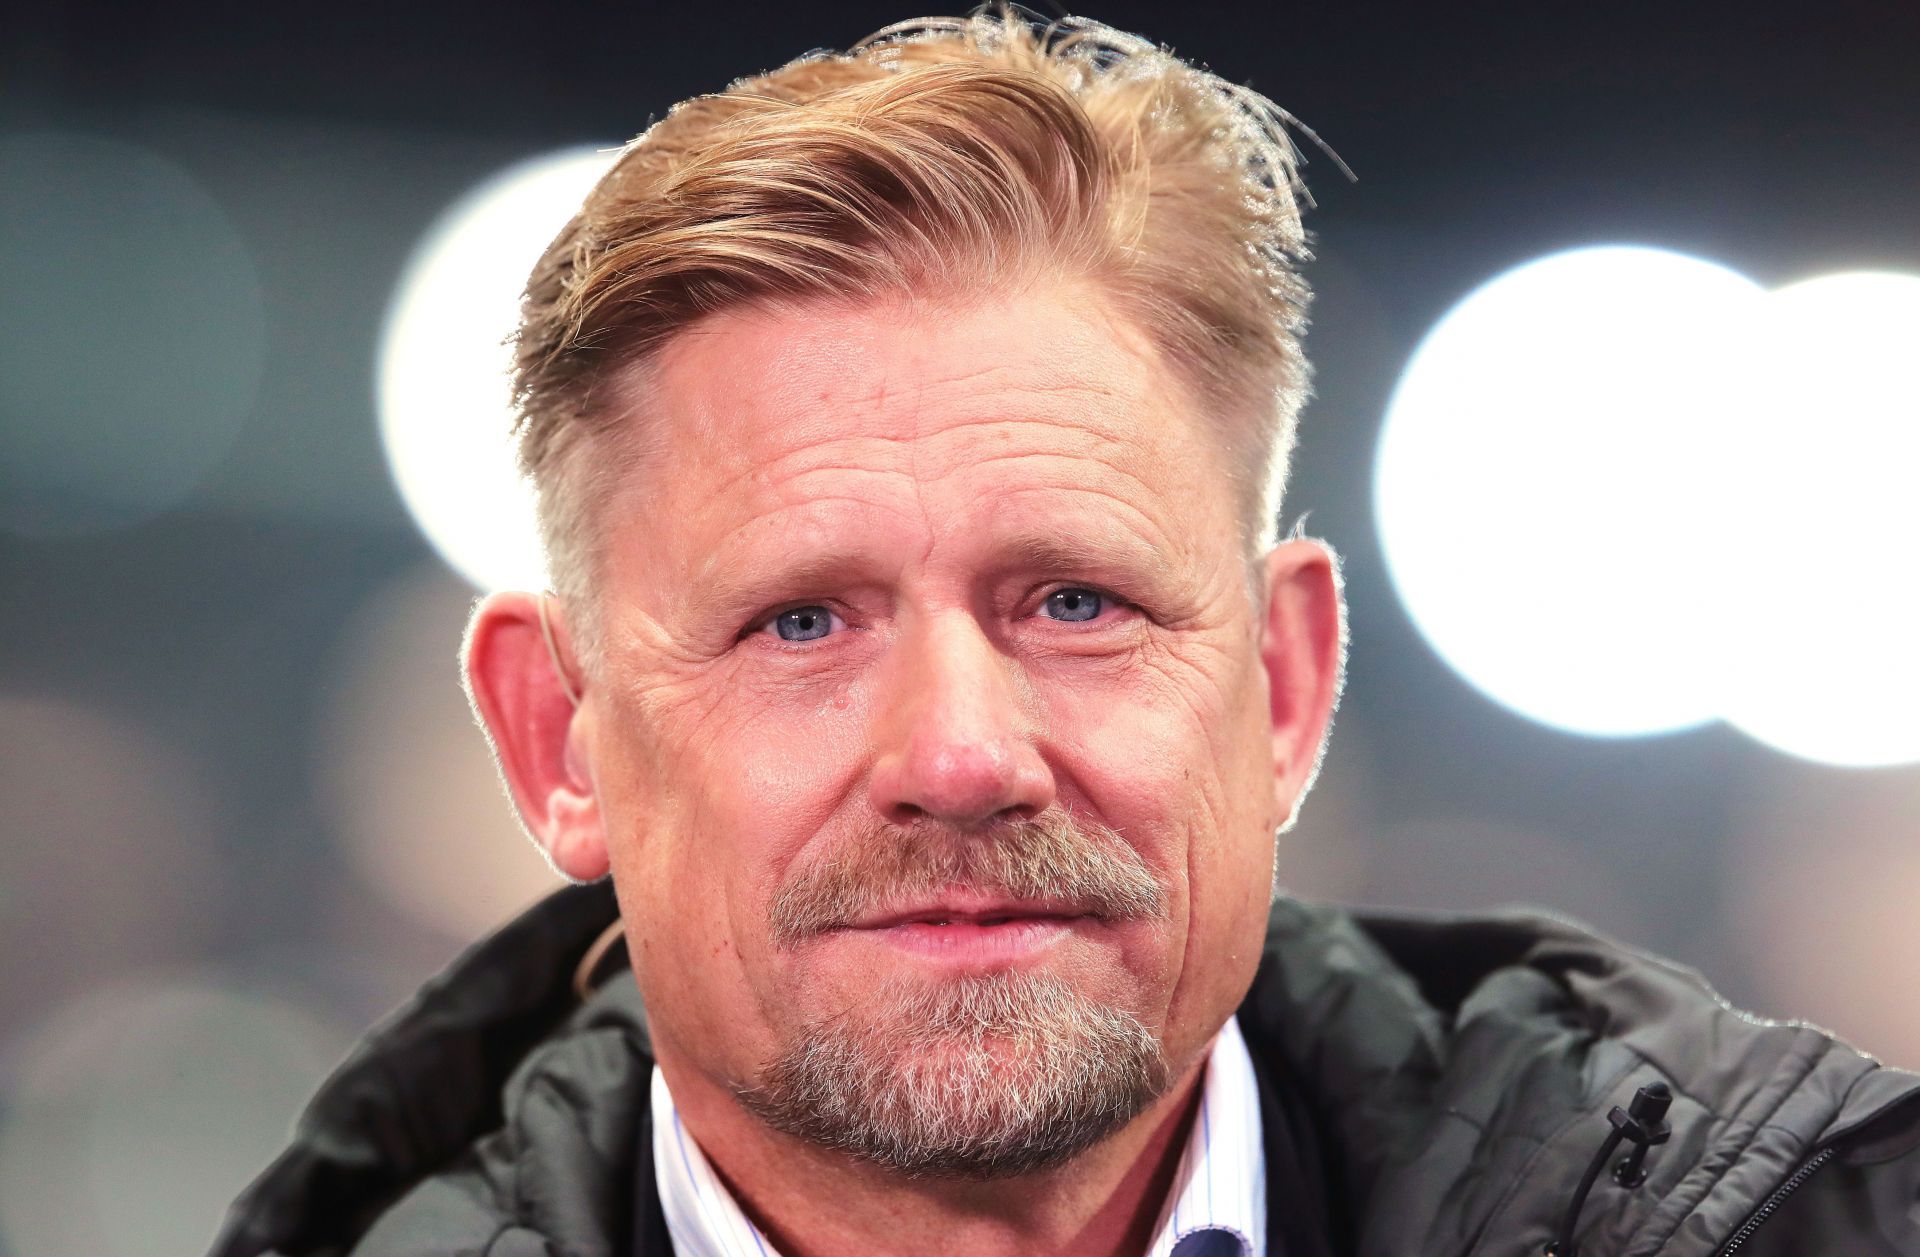 Peter Schmeichel picks his favorite for the fourth spot.